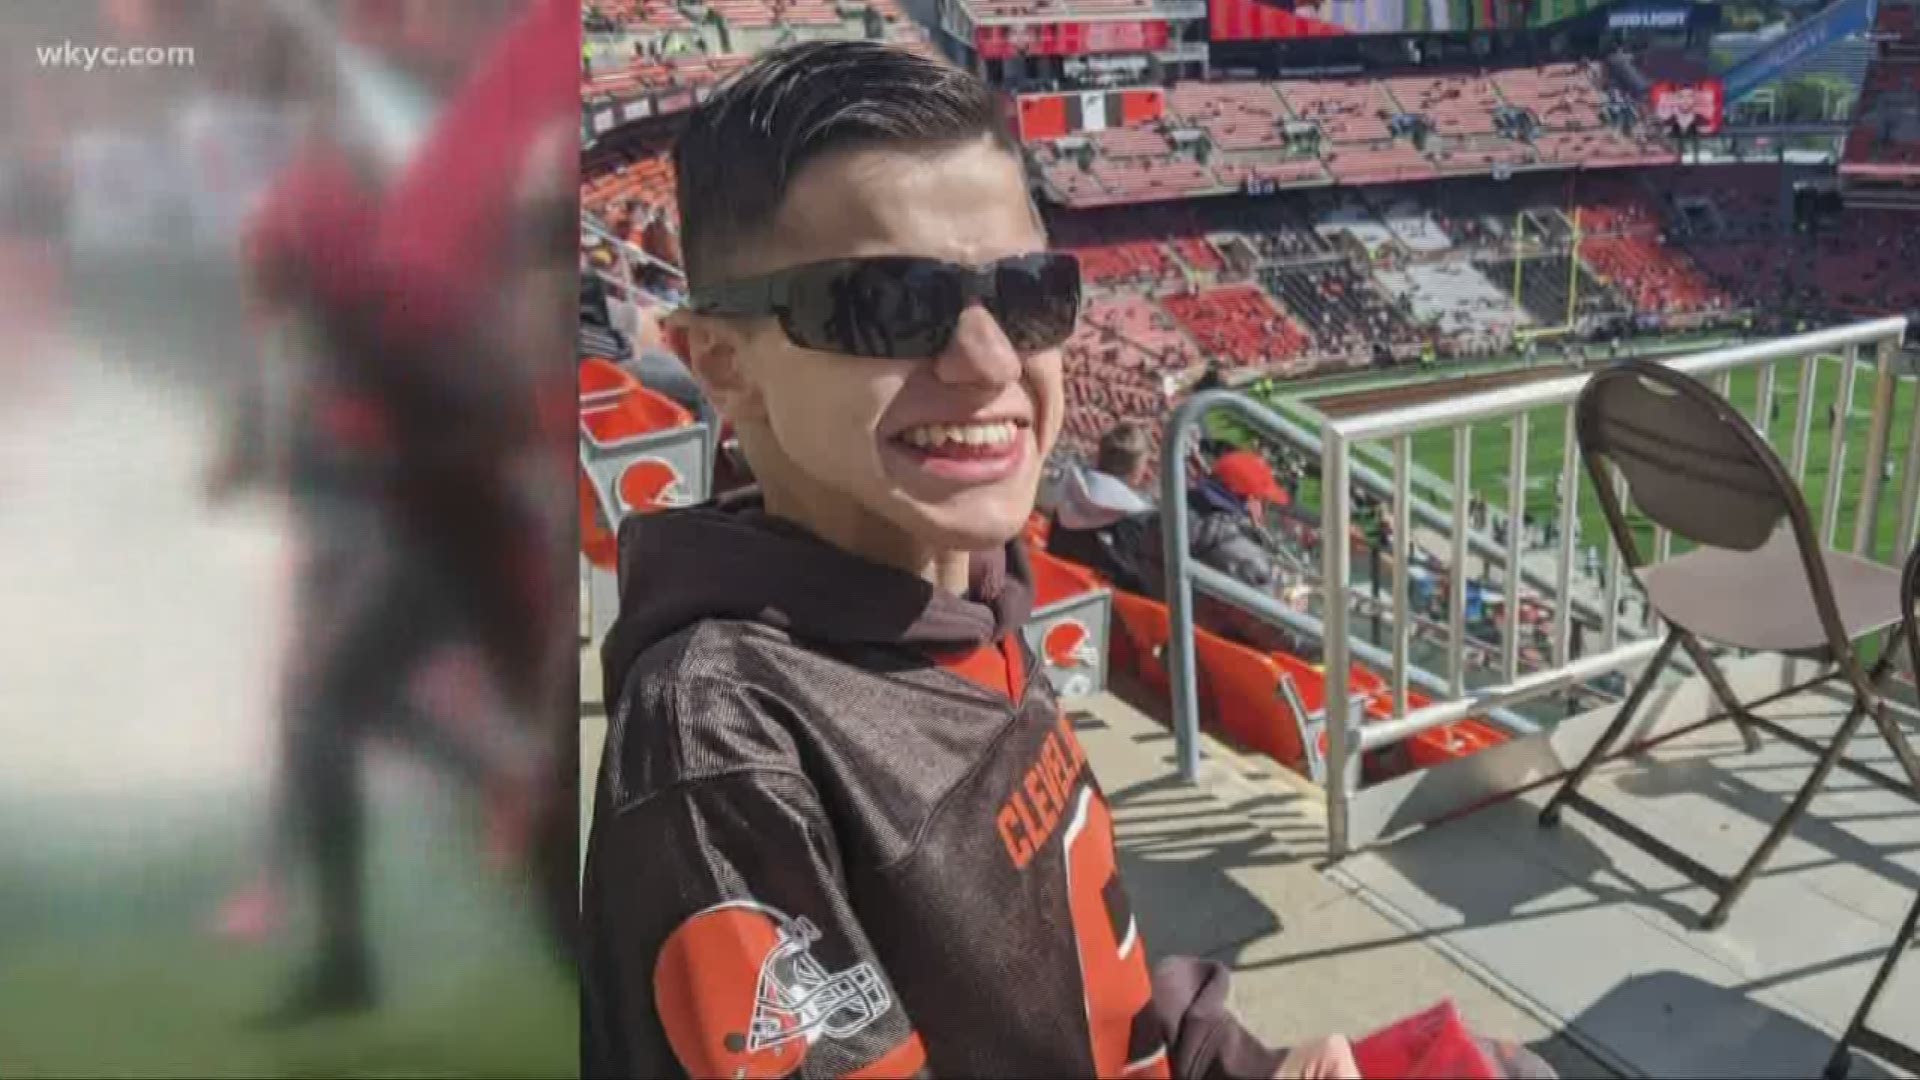 A Browns fan in a wheel chair had to be carried to his seat at Sunday's game due to able bodied people occupying the seats. The Browns organization has reached out.